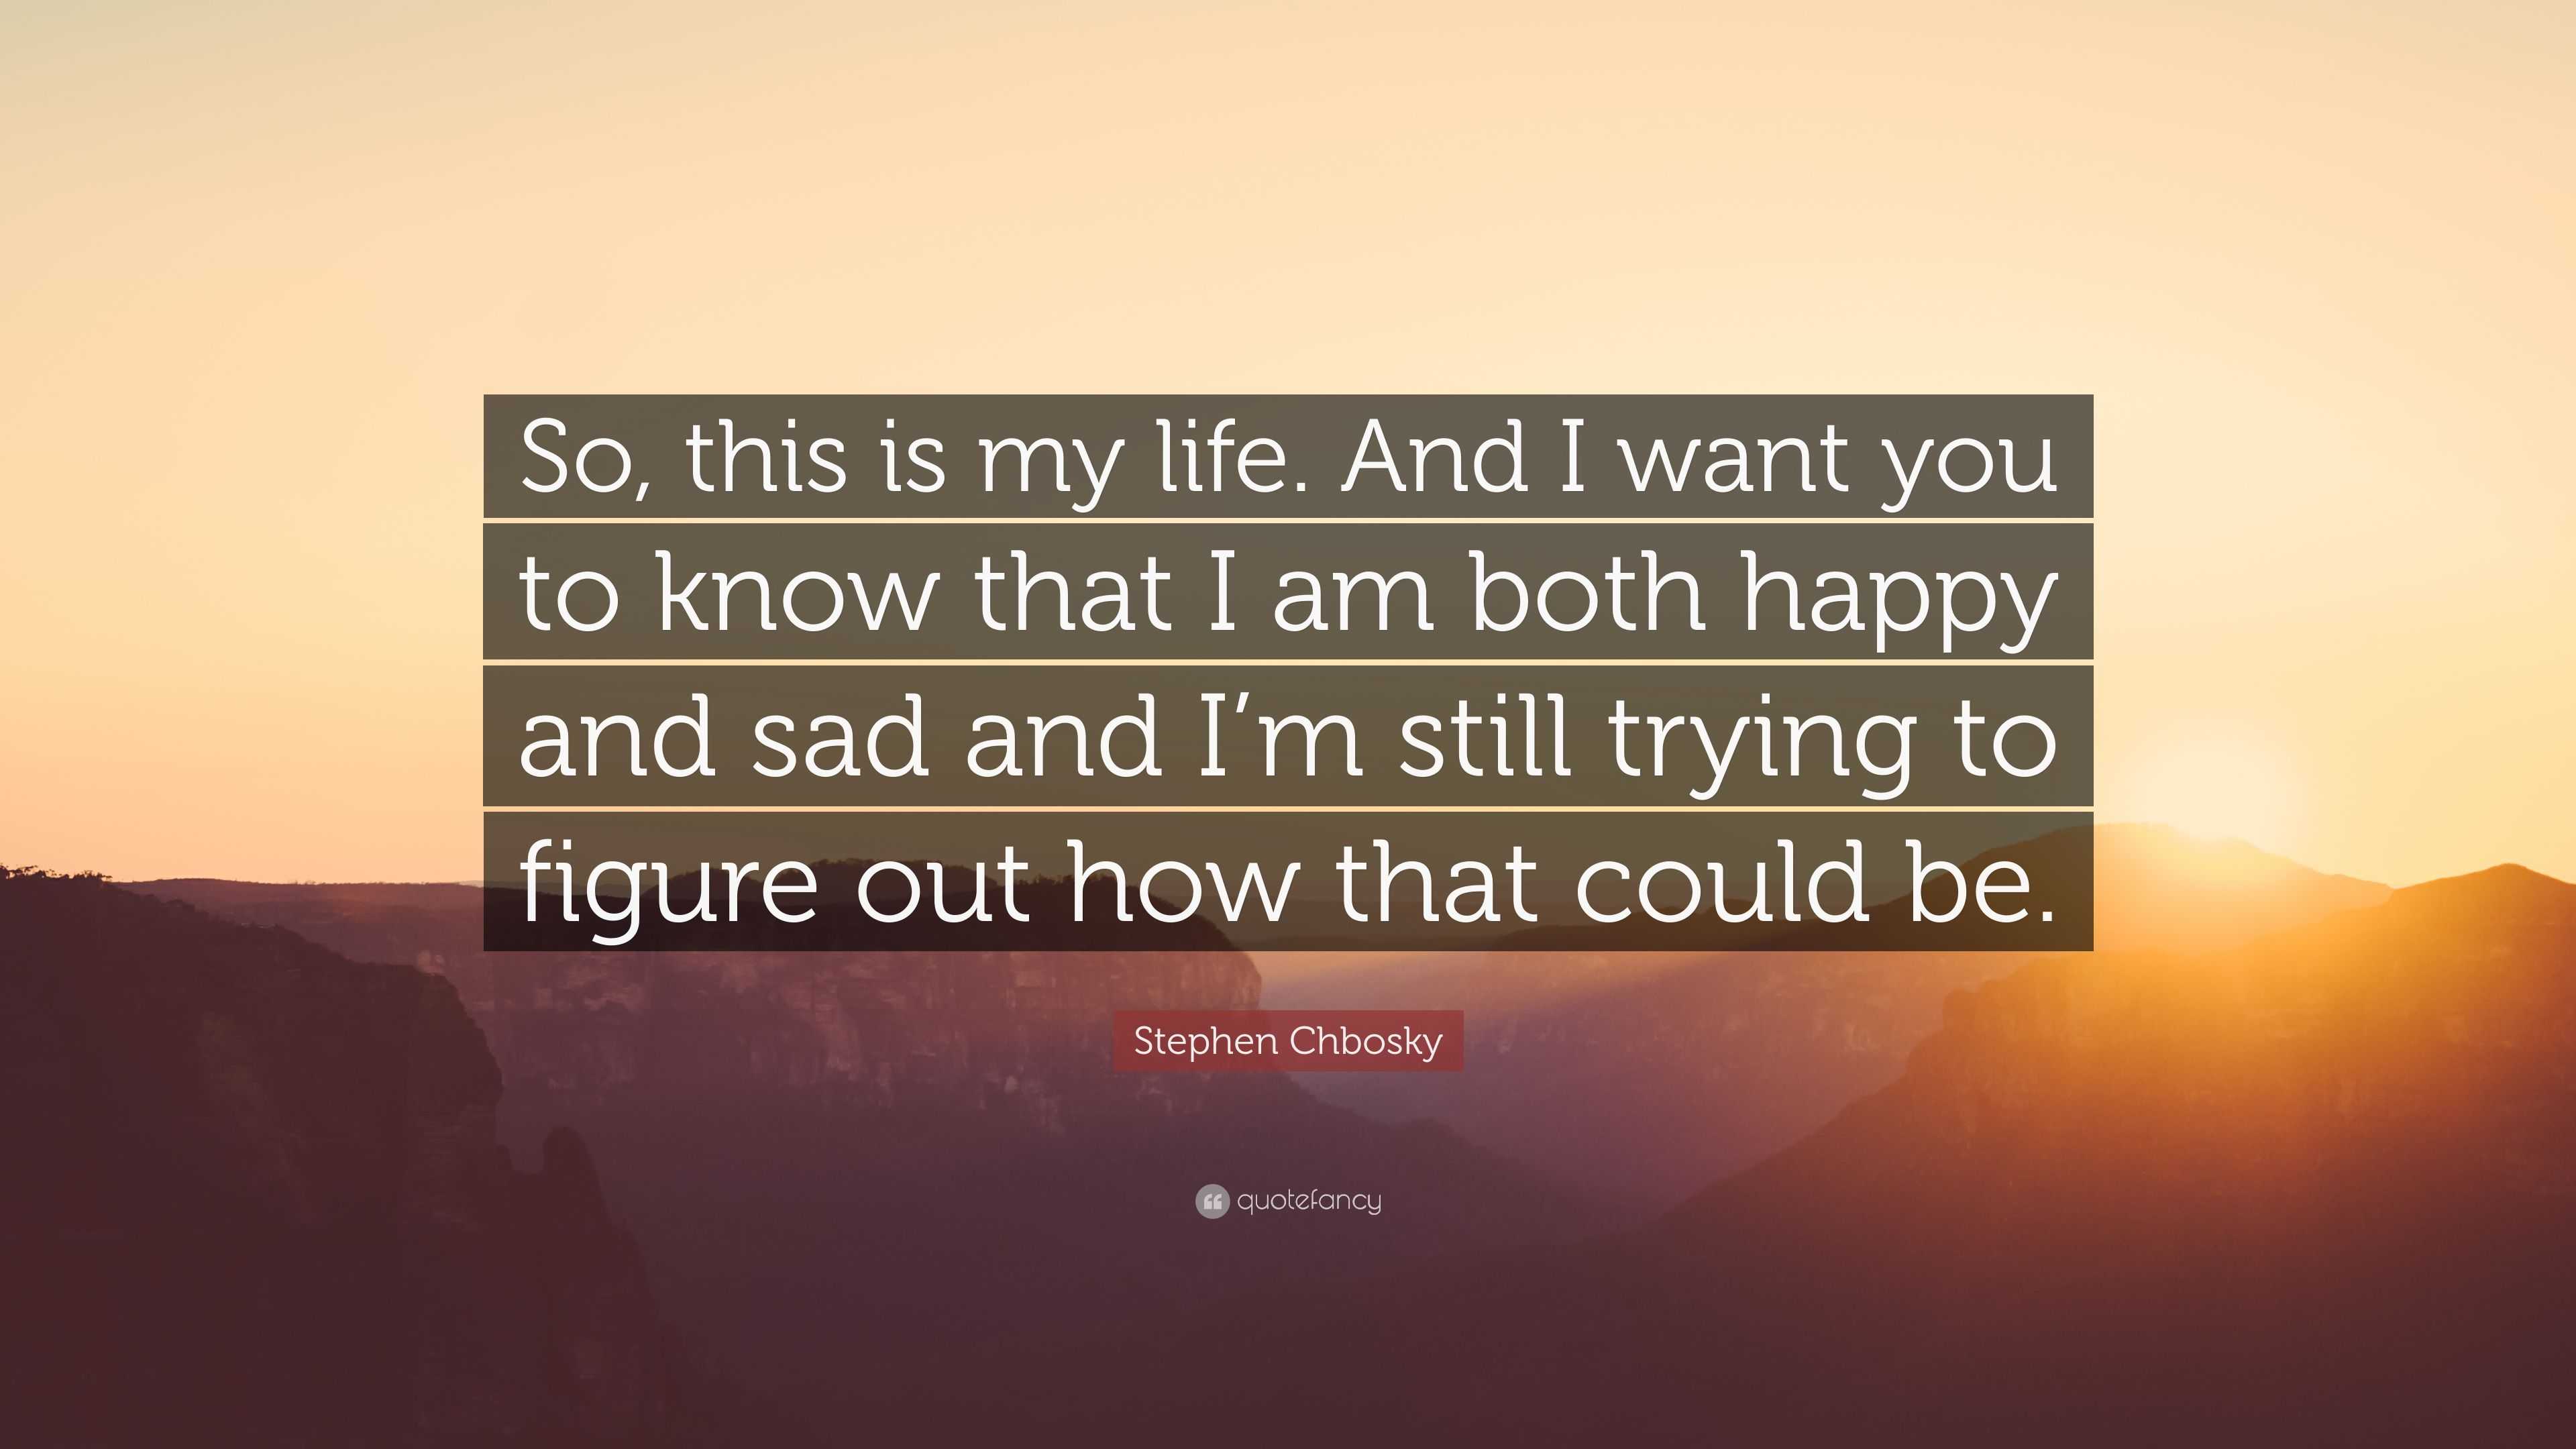 Stephen Chbosky Quote “So this is my life And I want you